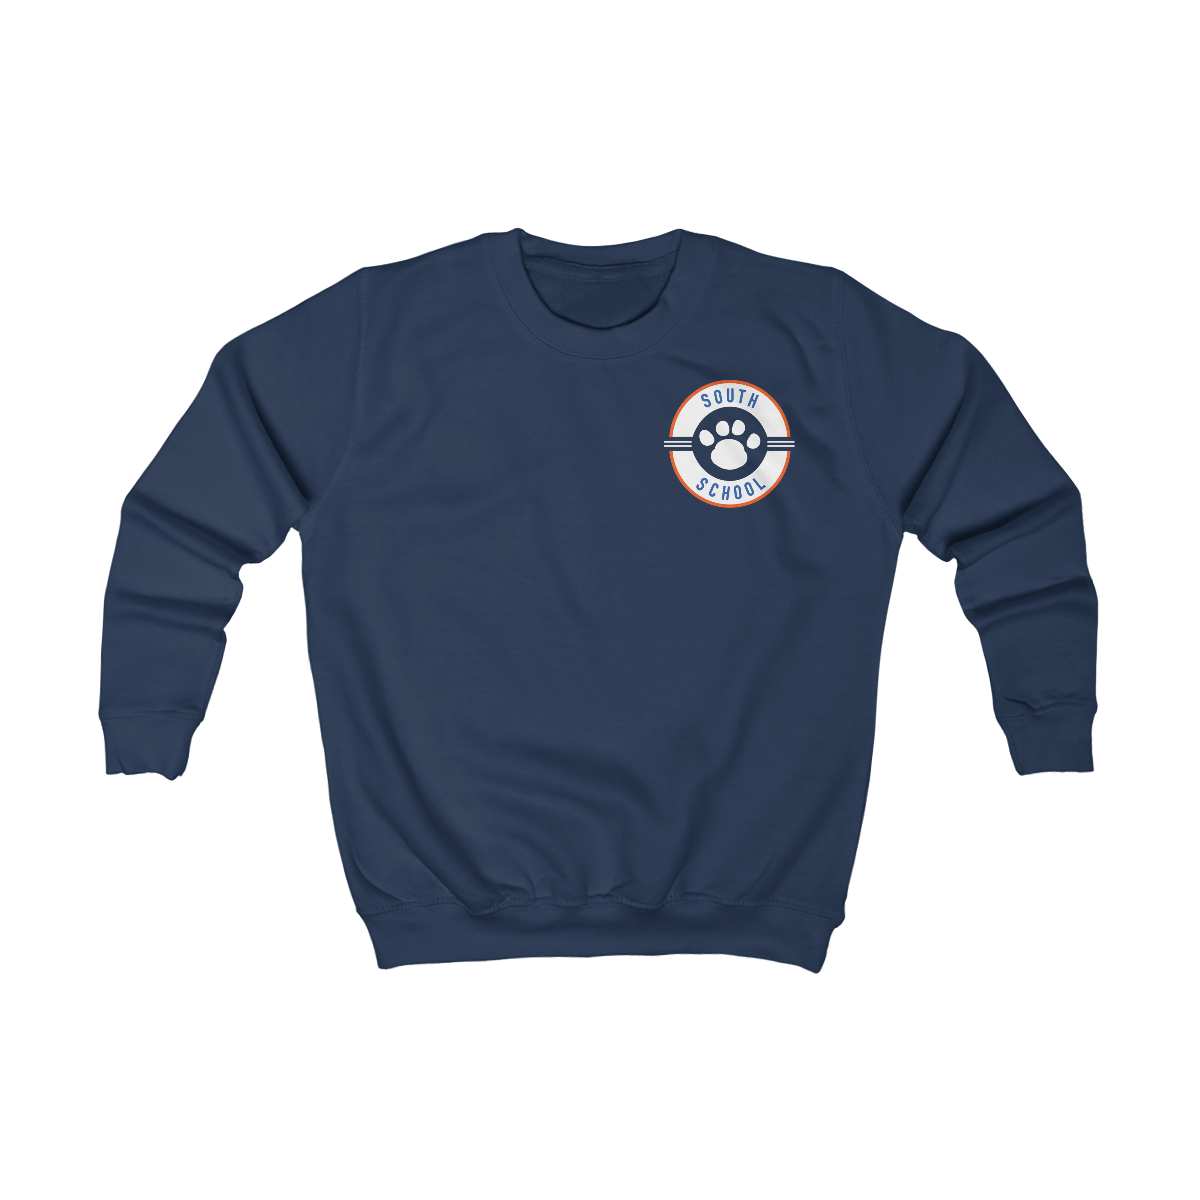 Youth Crewneck Sweatshirt, South Tiger Paw (Multiple Colors Available)